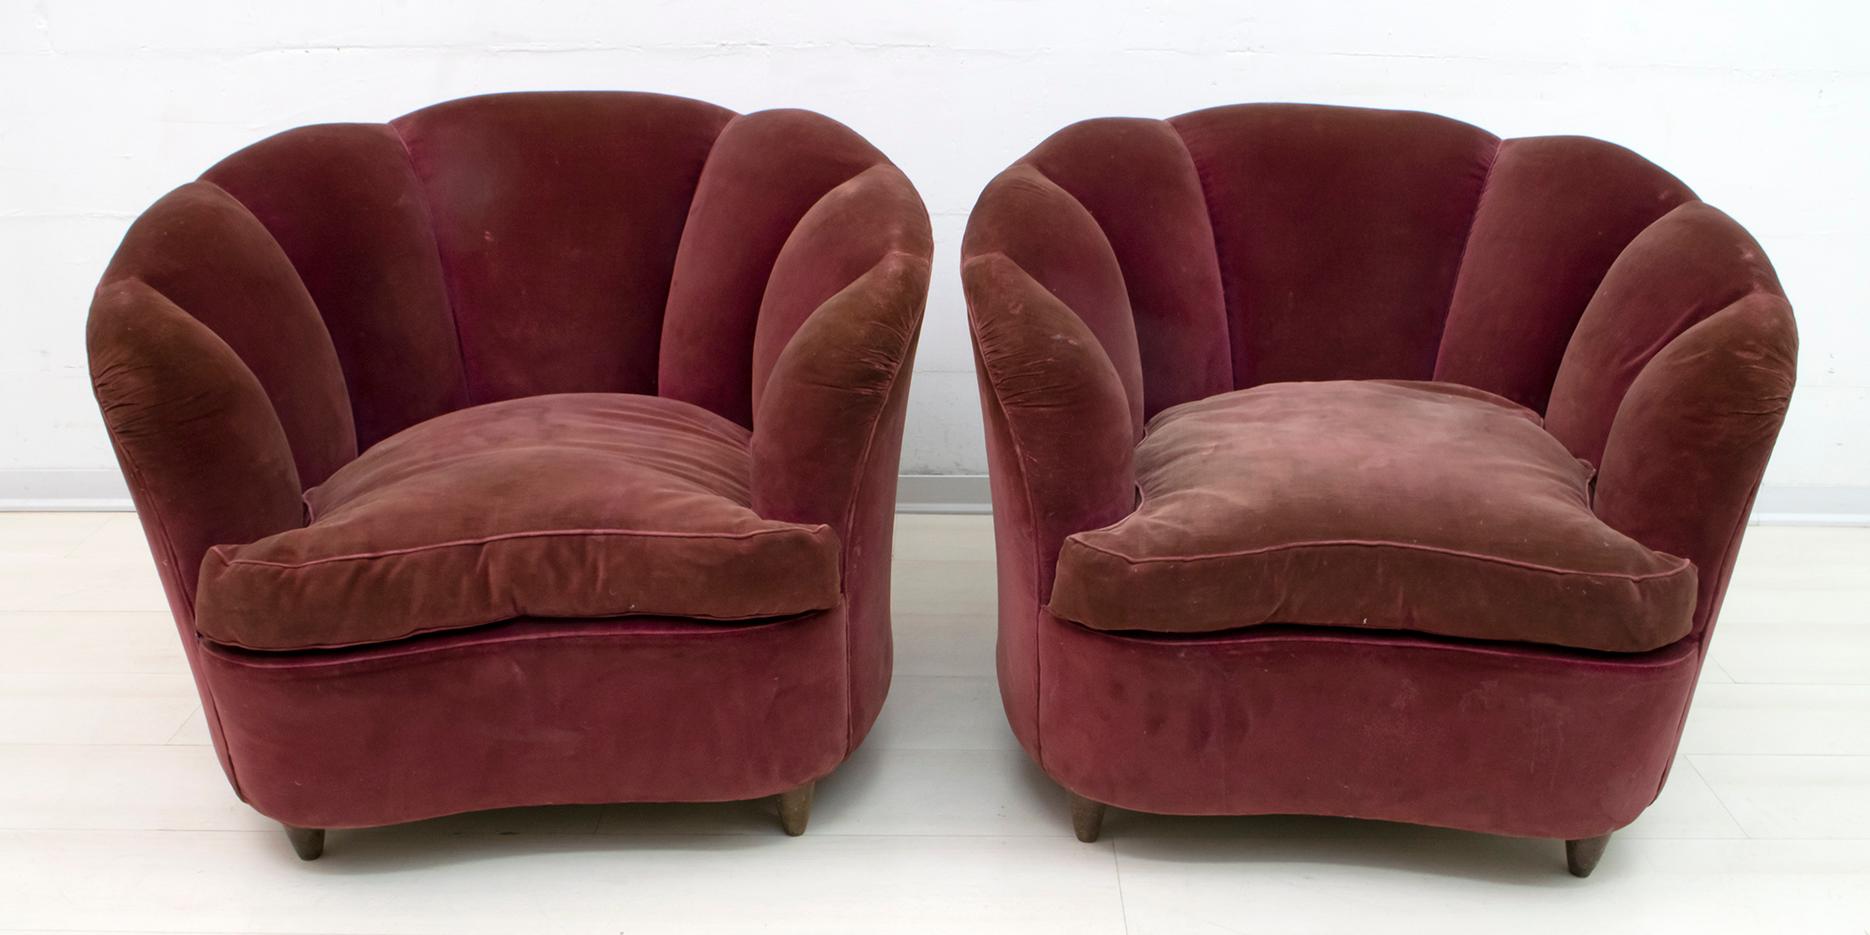 Rare sofa and two armchairs by Gio Ponti for Casa e Giardino, 1936.
Shell model covered in original velvet of the time, with goose down cushions. The coating, as shown in the photo, has faded in some parts and worn out. It is recommended to redo